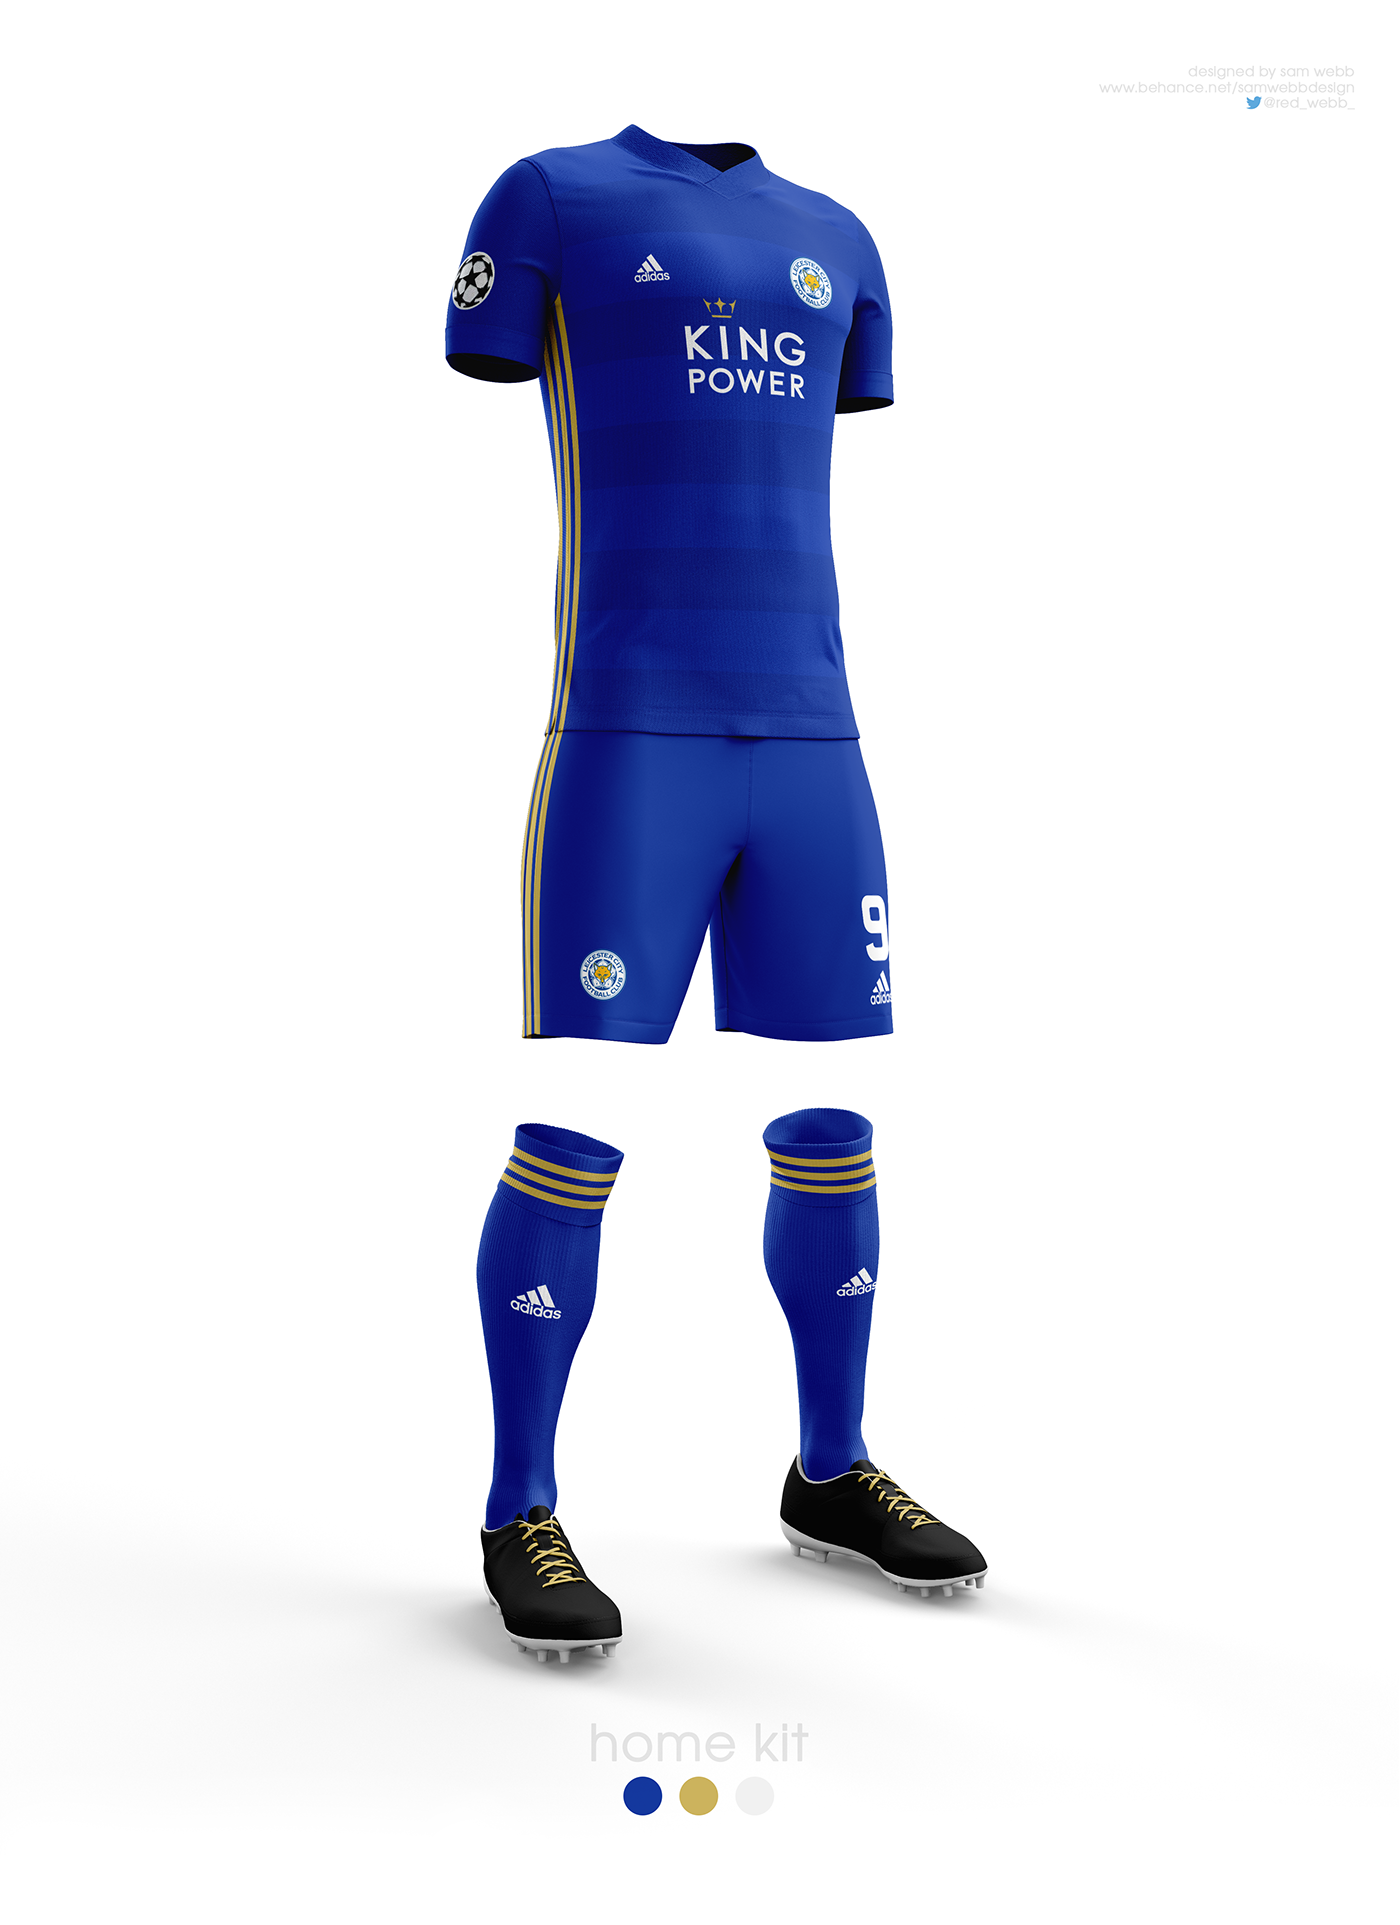 Leicester City FC Kit Designs 16/17 on Behance